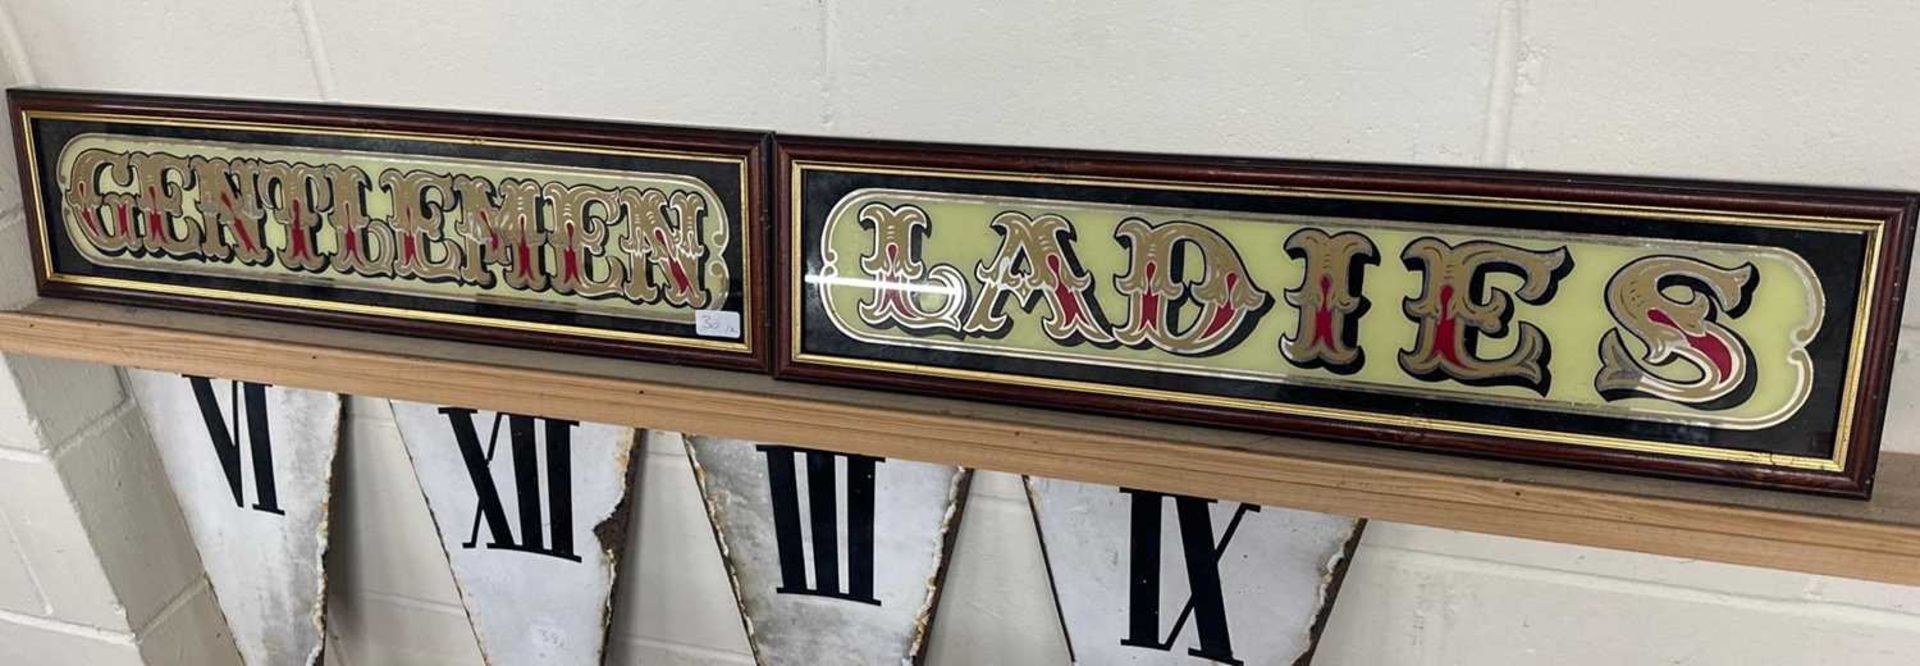 Two mirrored pub signs "Gentlemen" and "Ladies", both framed